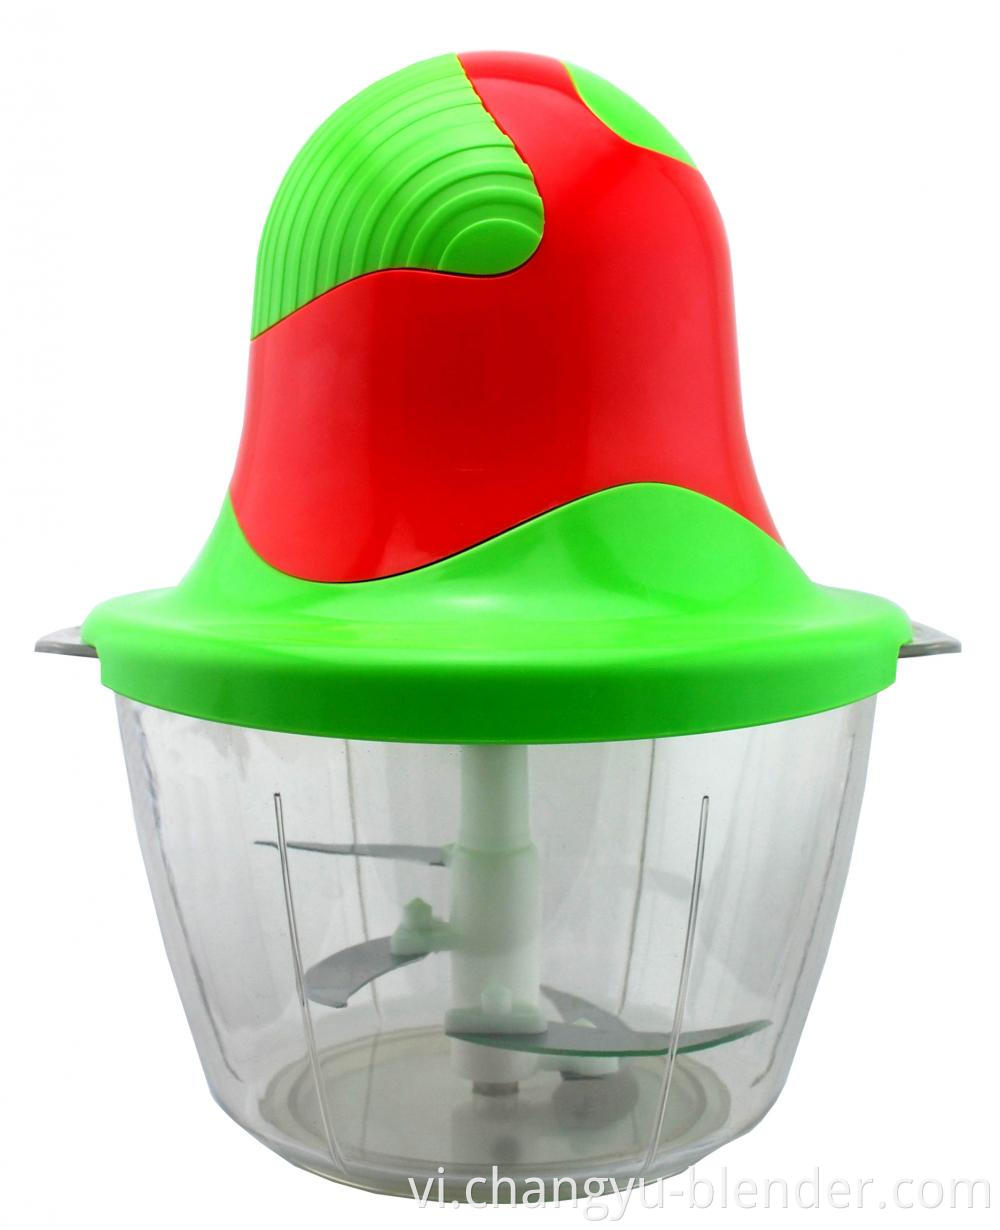 Electric food chopper for making salads